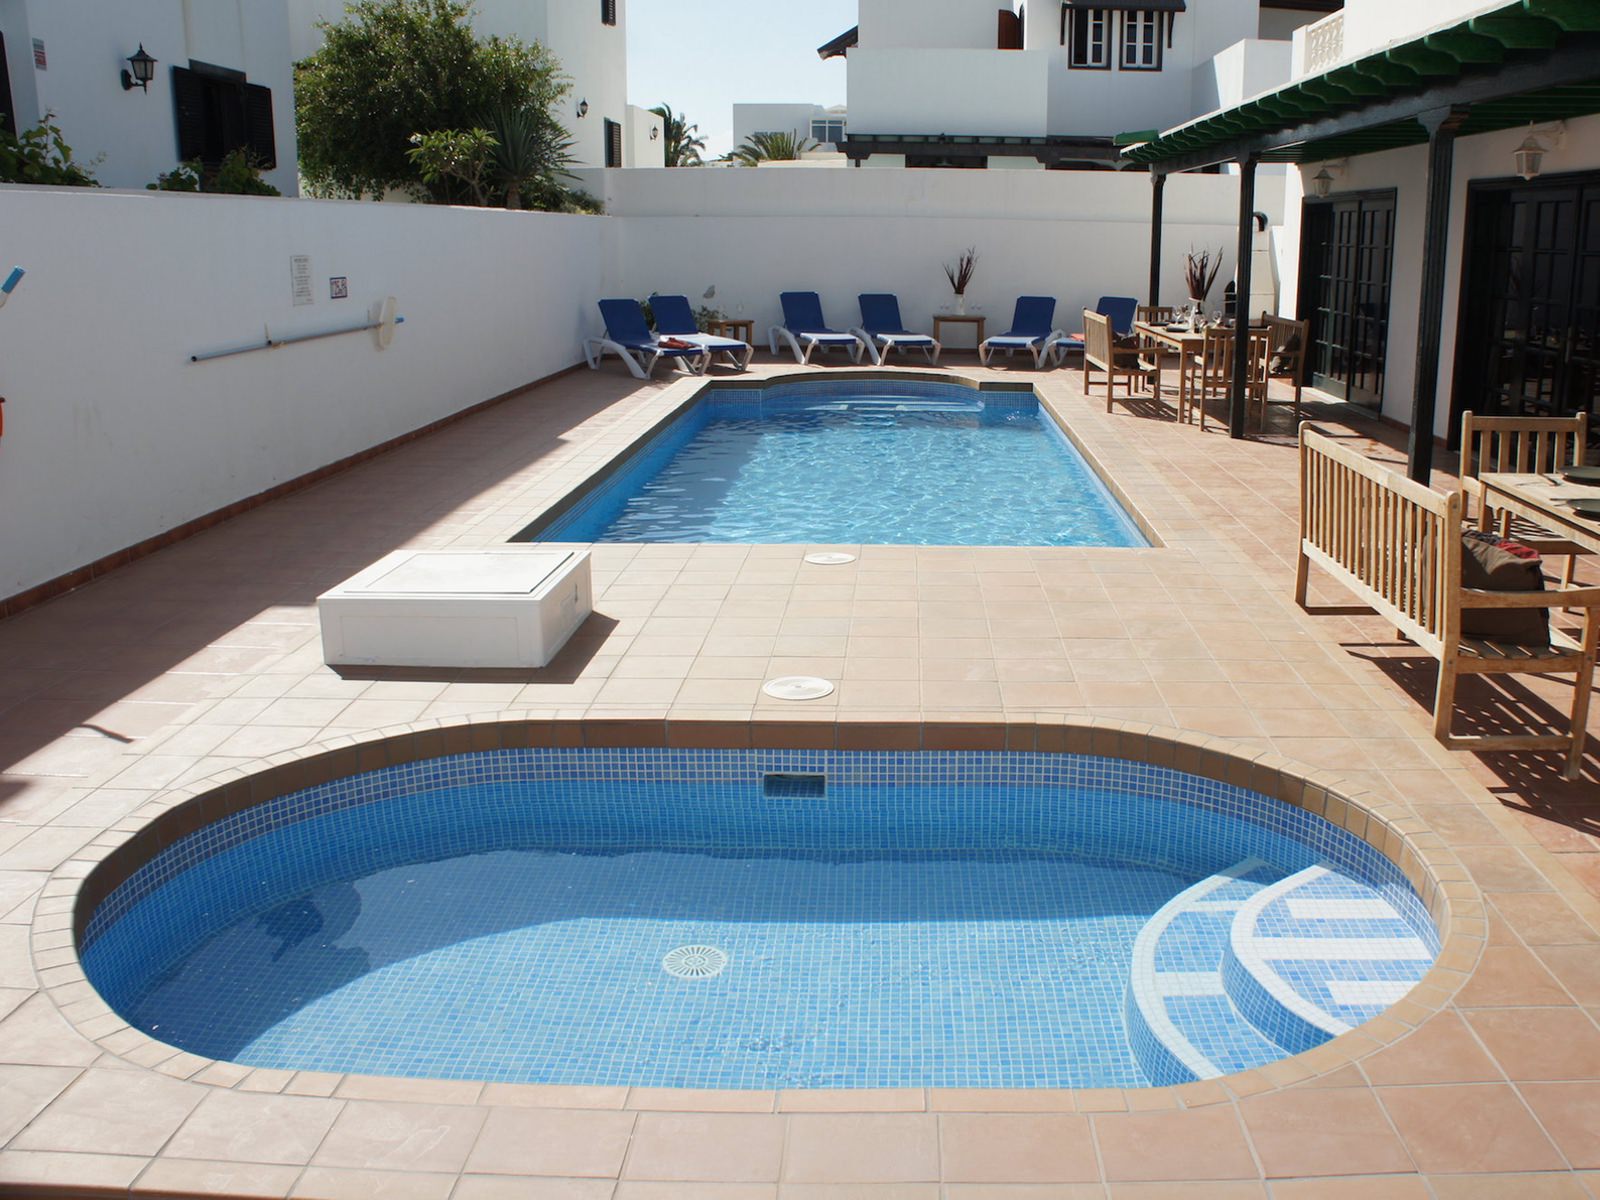 5 Bedroom Villa Central Costa Teguise Heated Pool, Games Room Wi-Fi